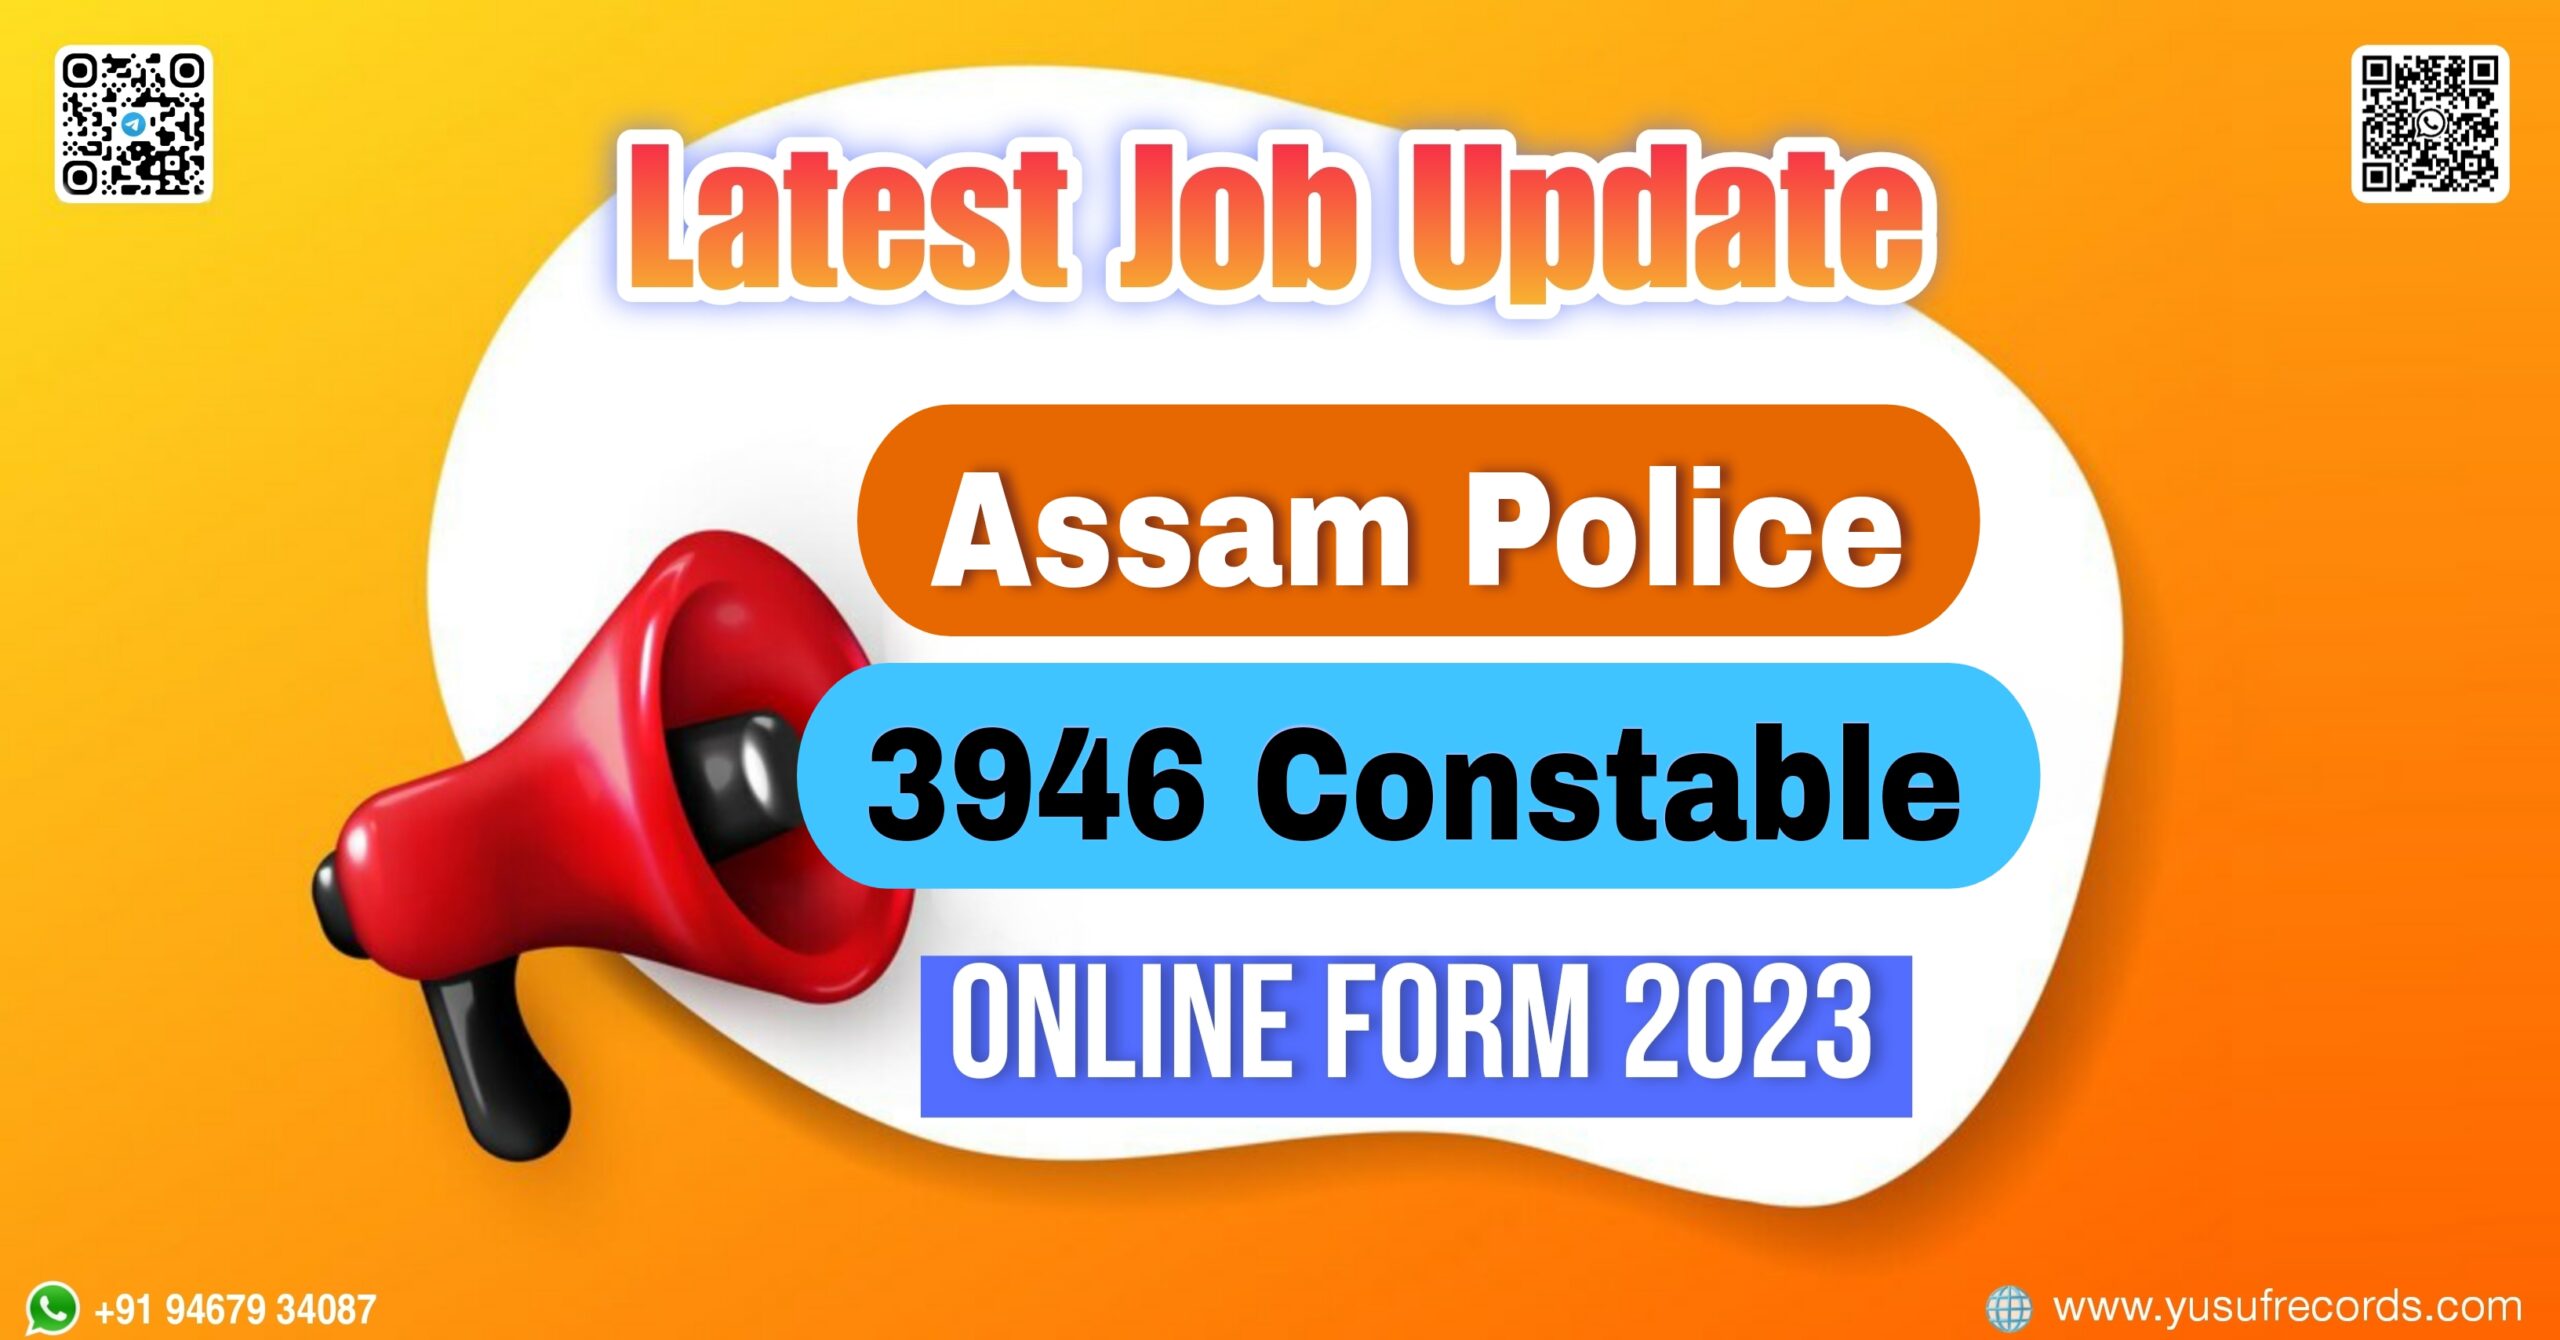 Assam Police 3946 Constable Online Form yusufrecords latest job updates